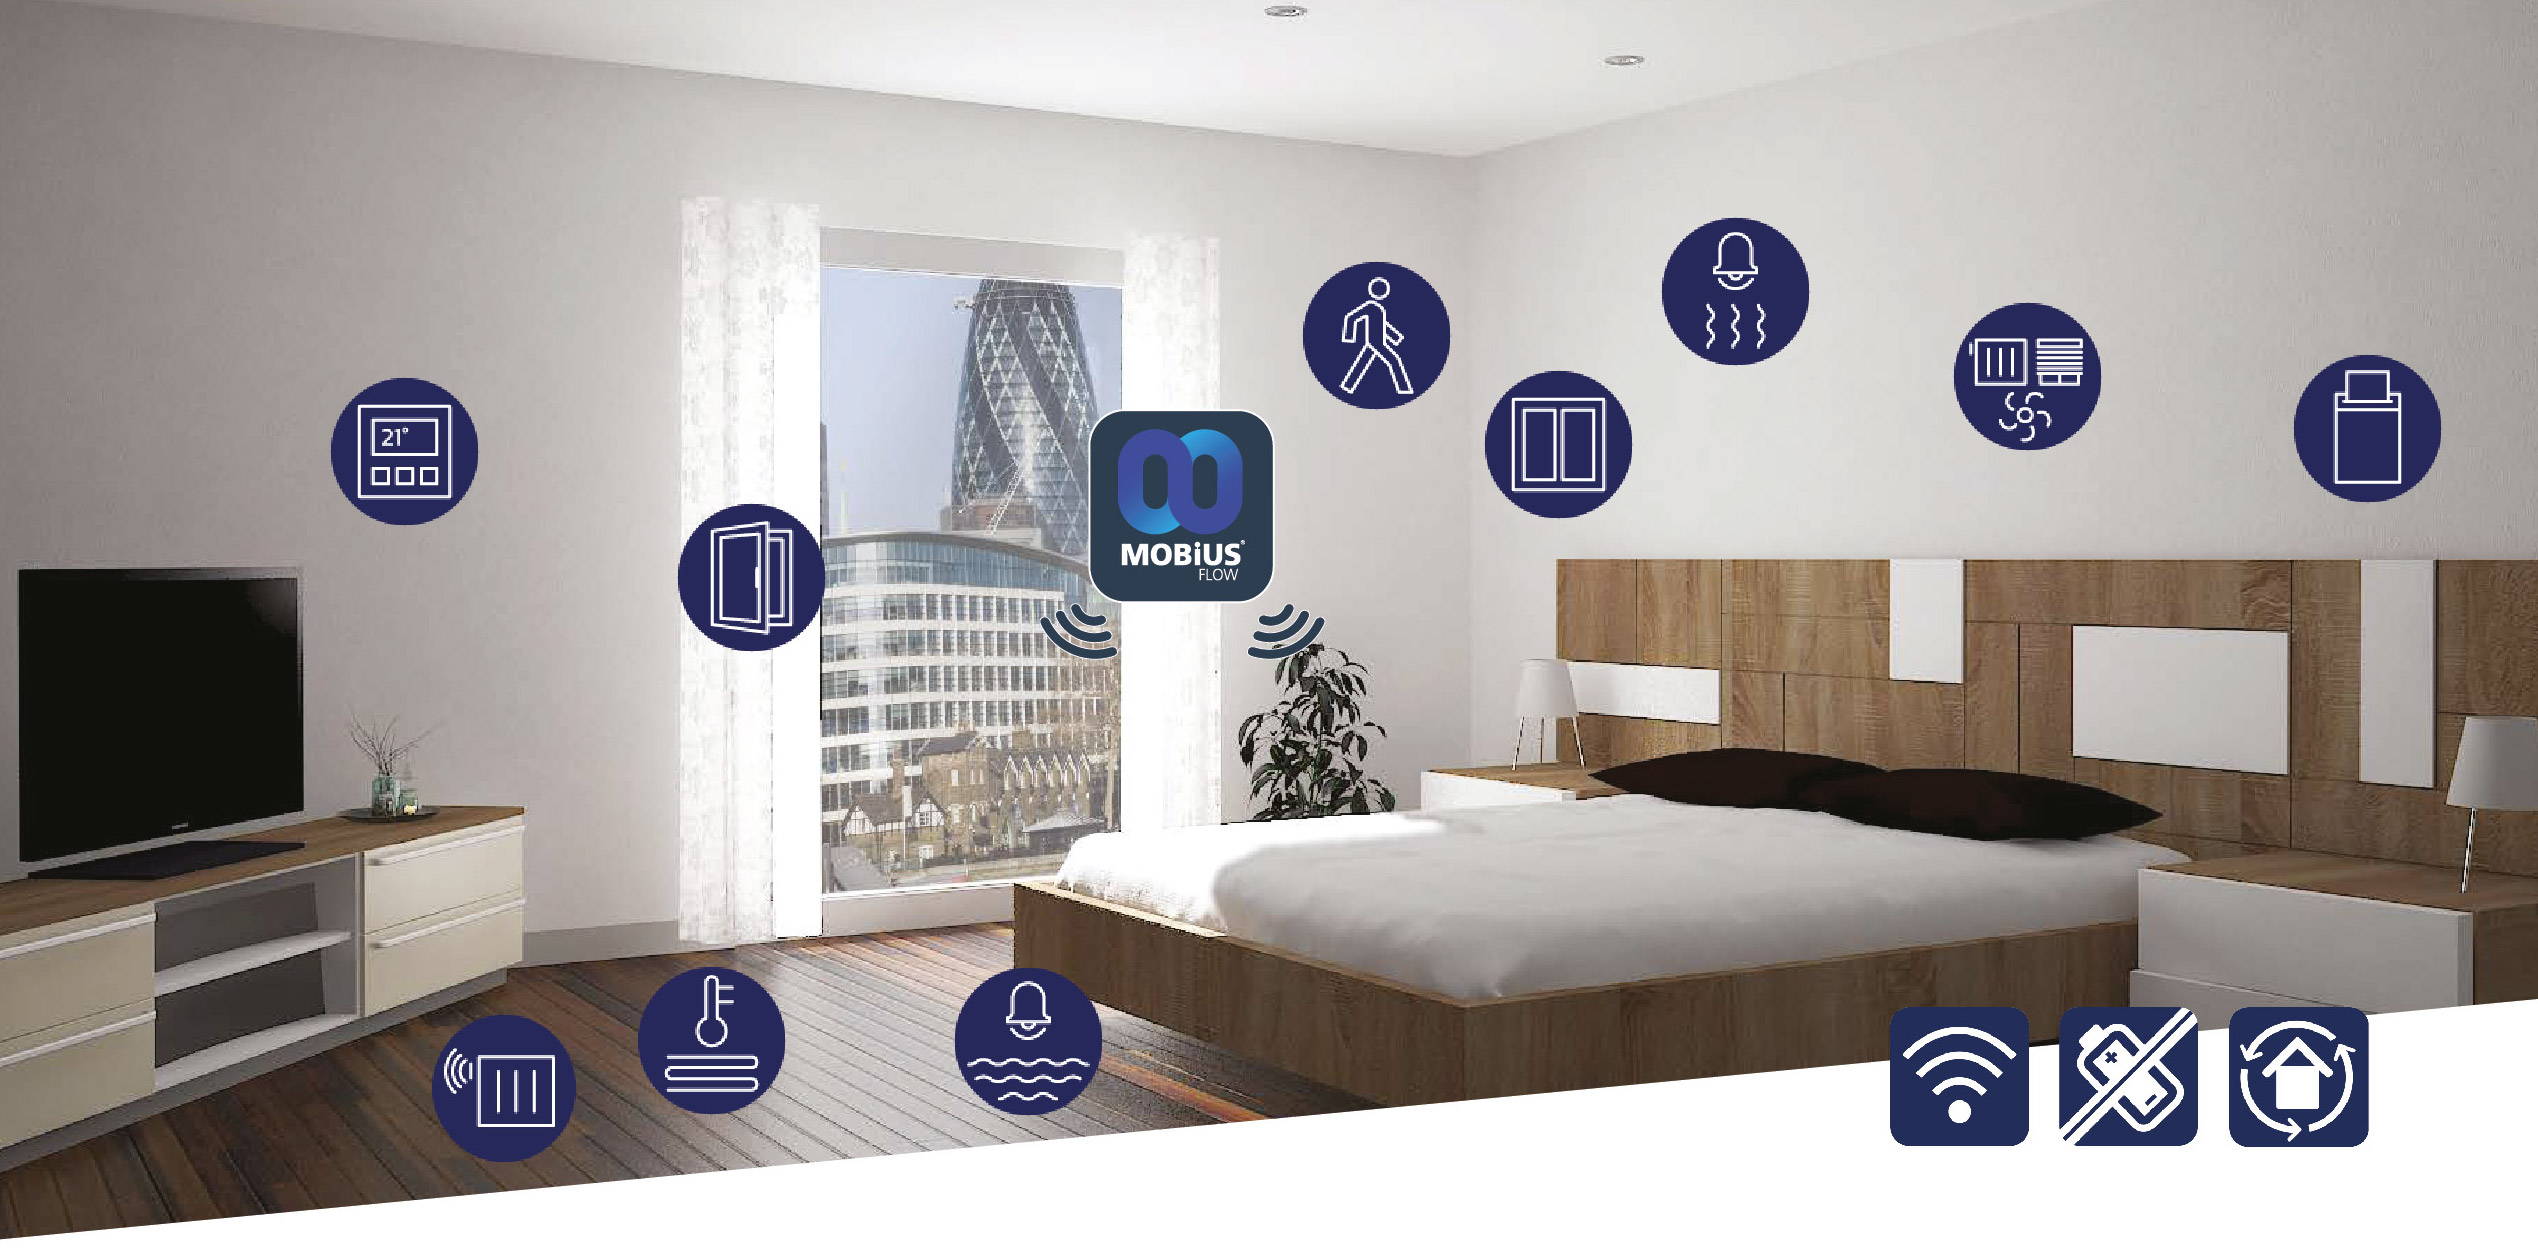  Smart  Hotels  IAconnects Connect Control Communicate